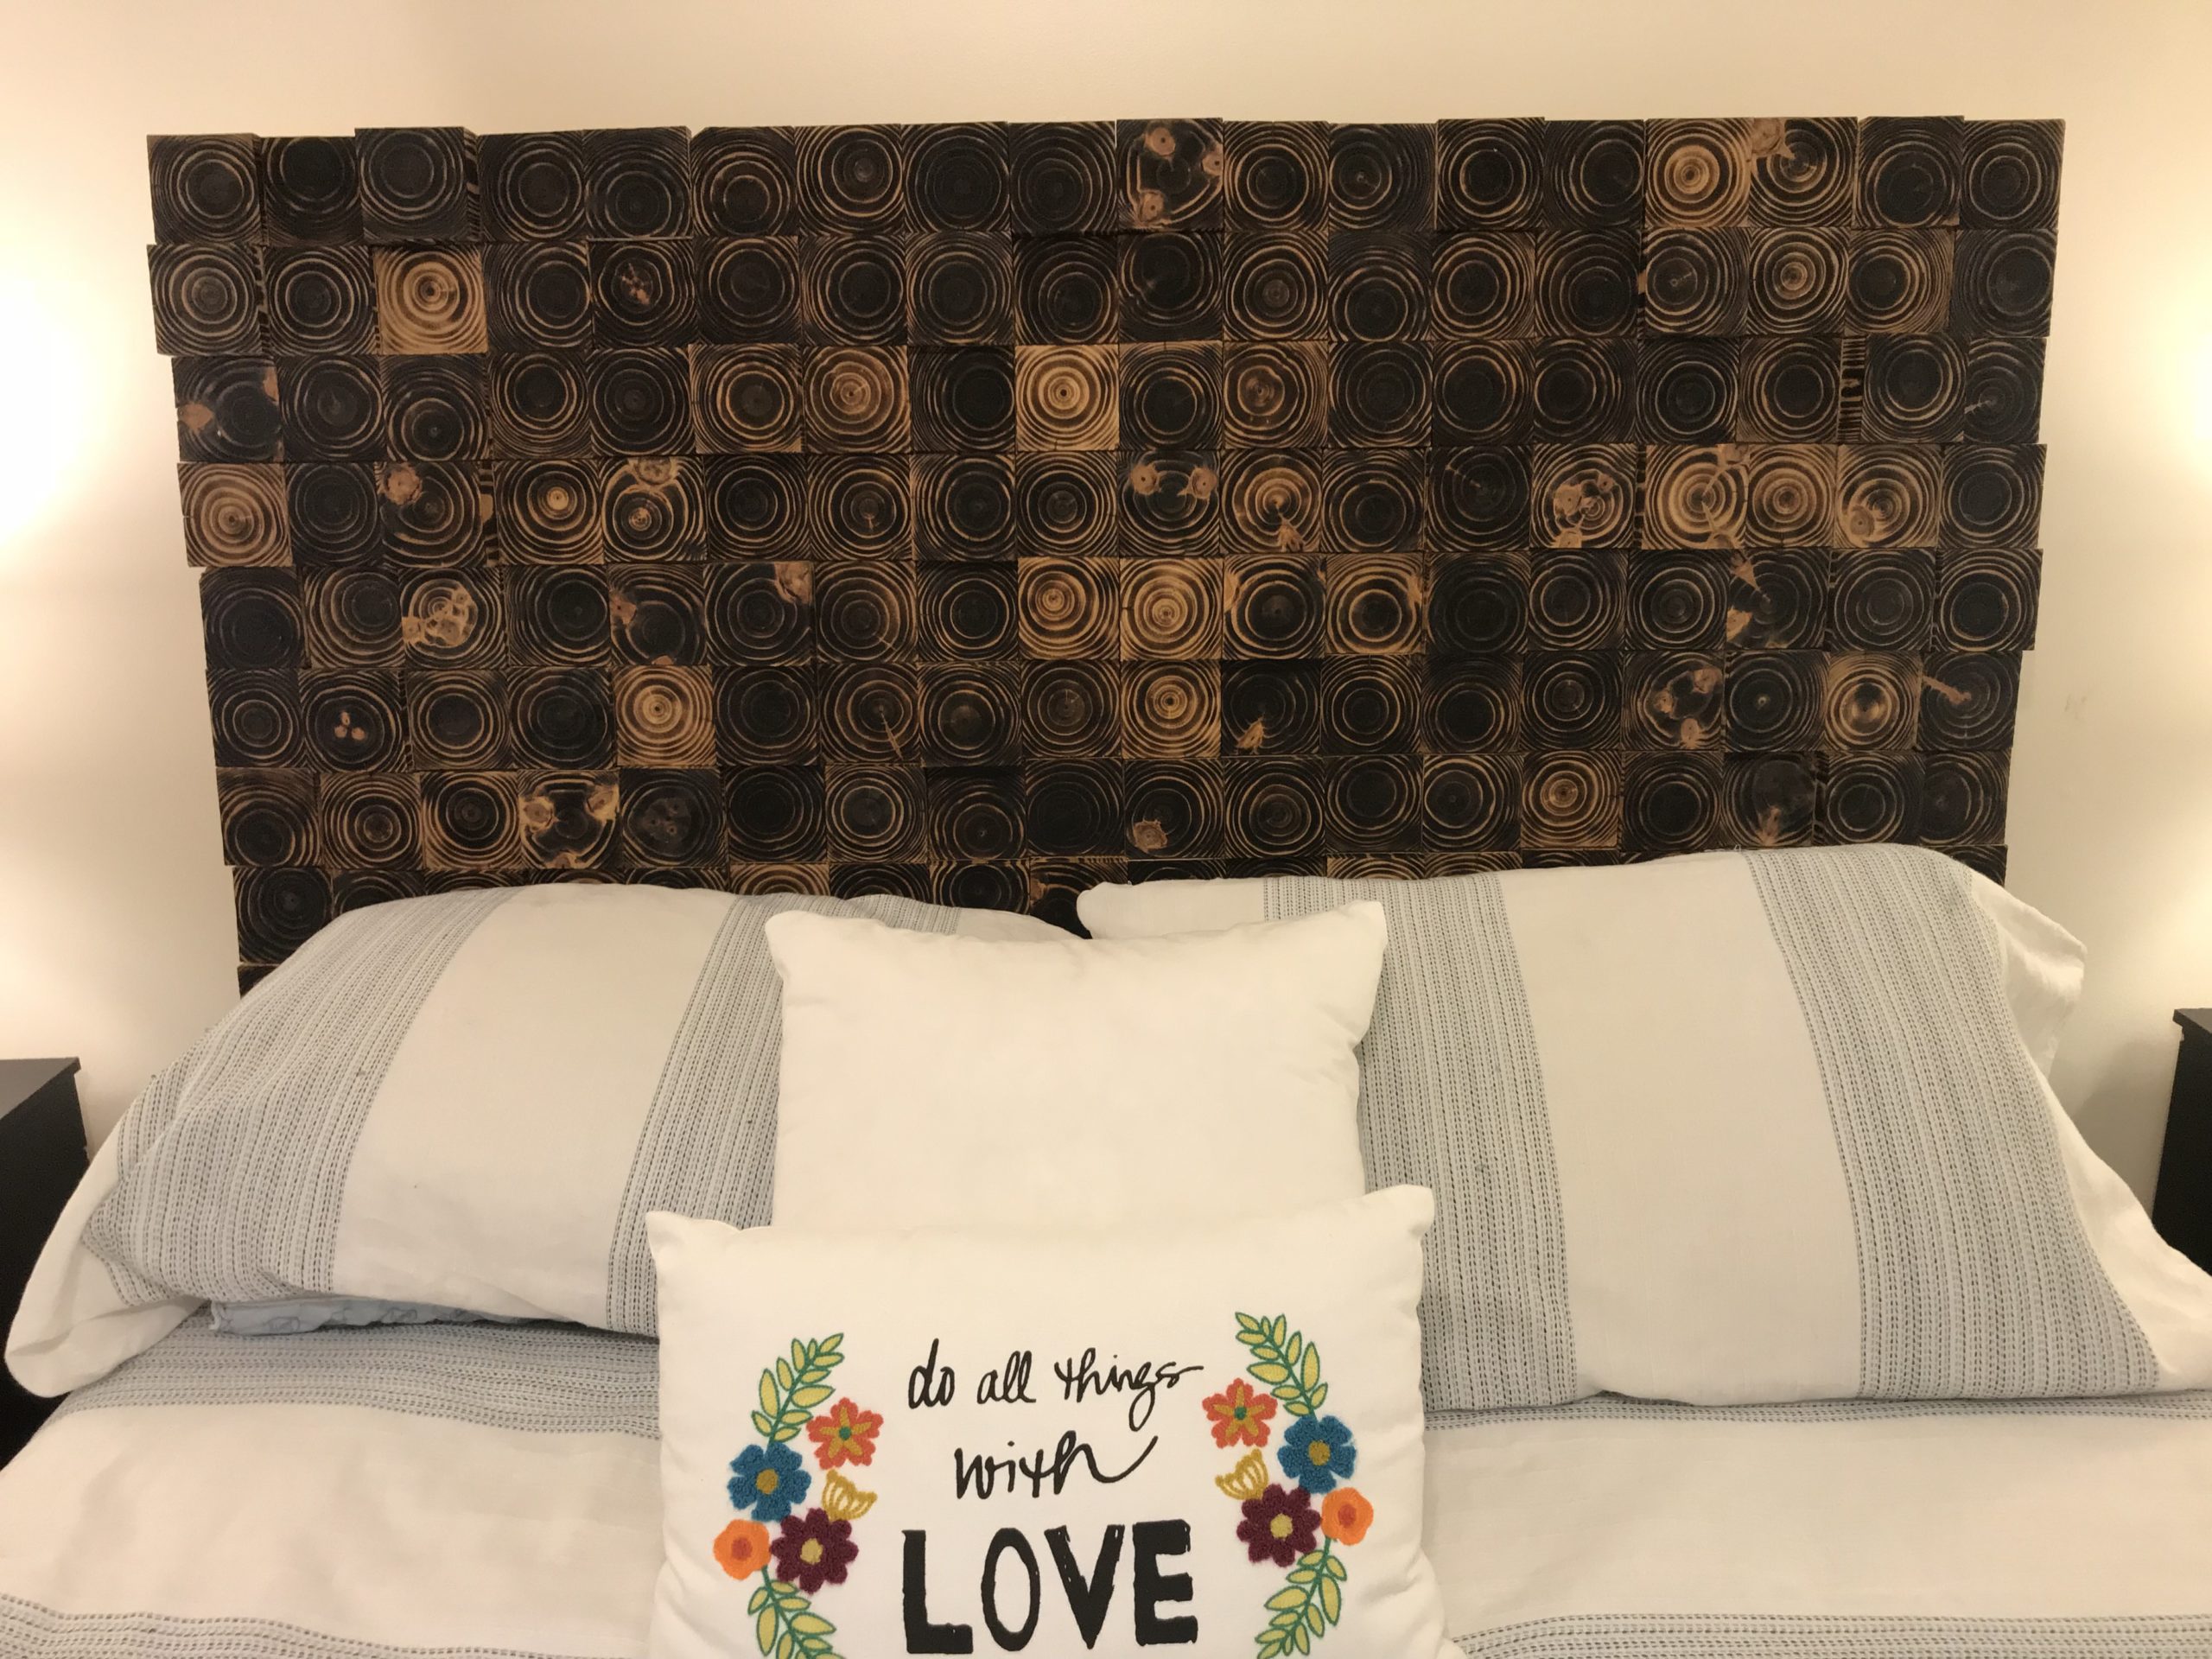 Headboard made of a collage of log cross-sections